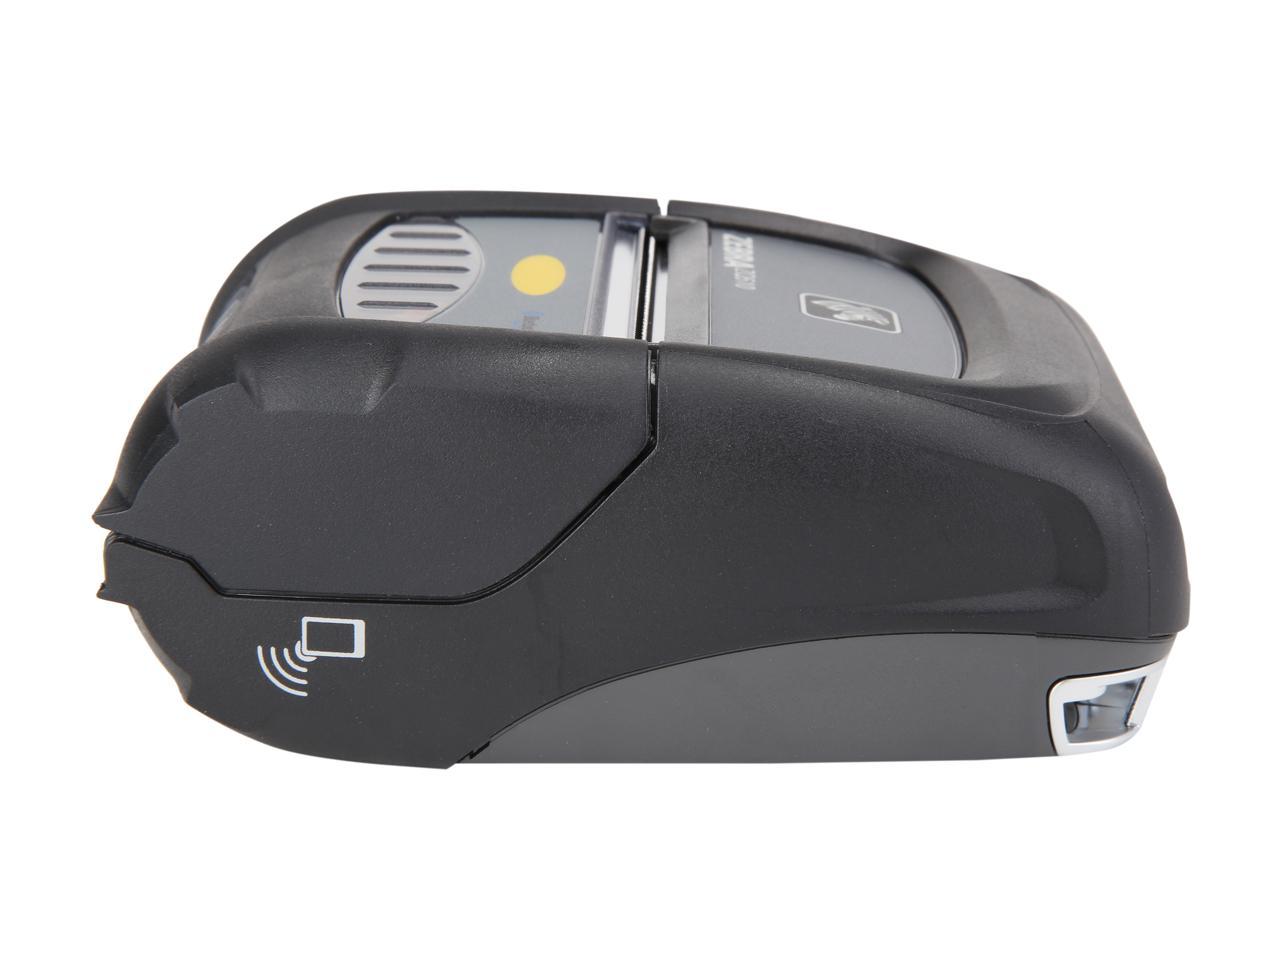 Zebra Zq510 3 Mobile Direct Thermal Receipt And Label Printer 203 Dpi Bluetooth 40 Linered 2344